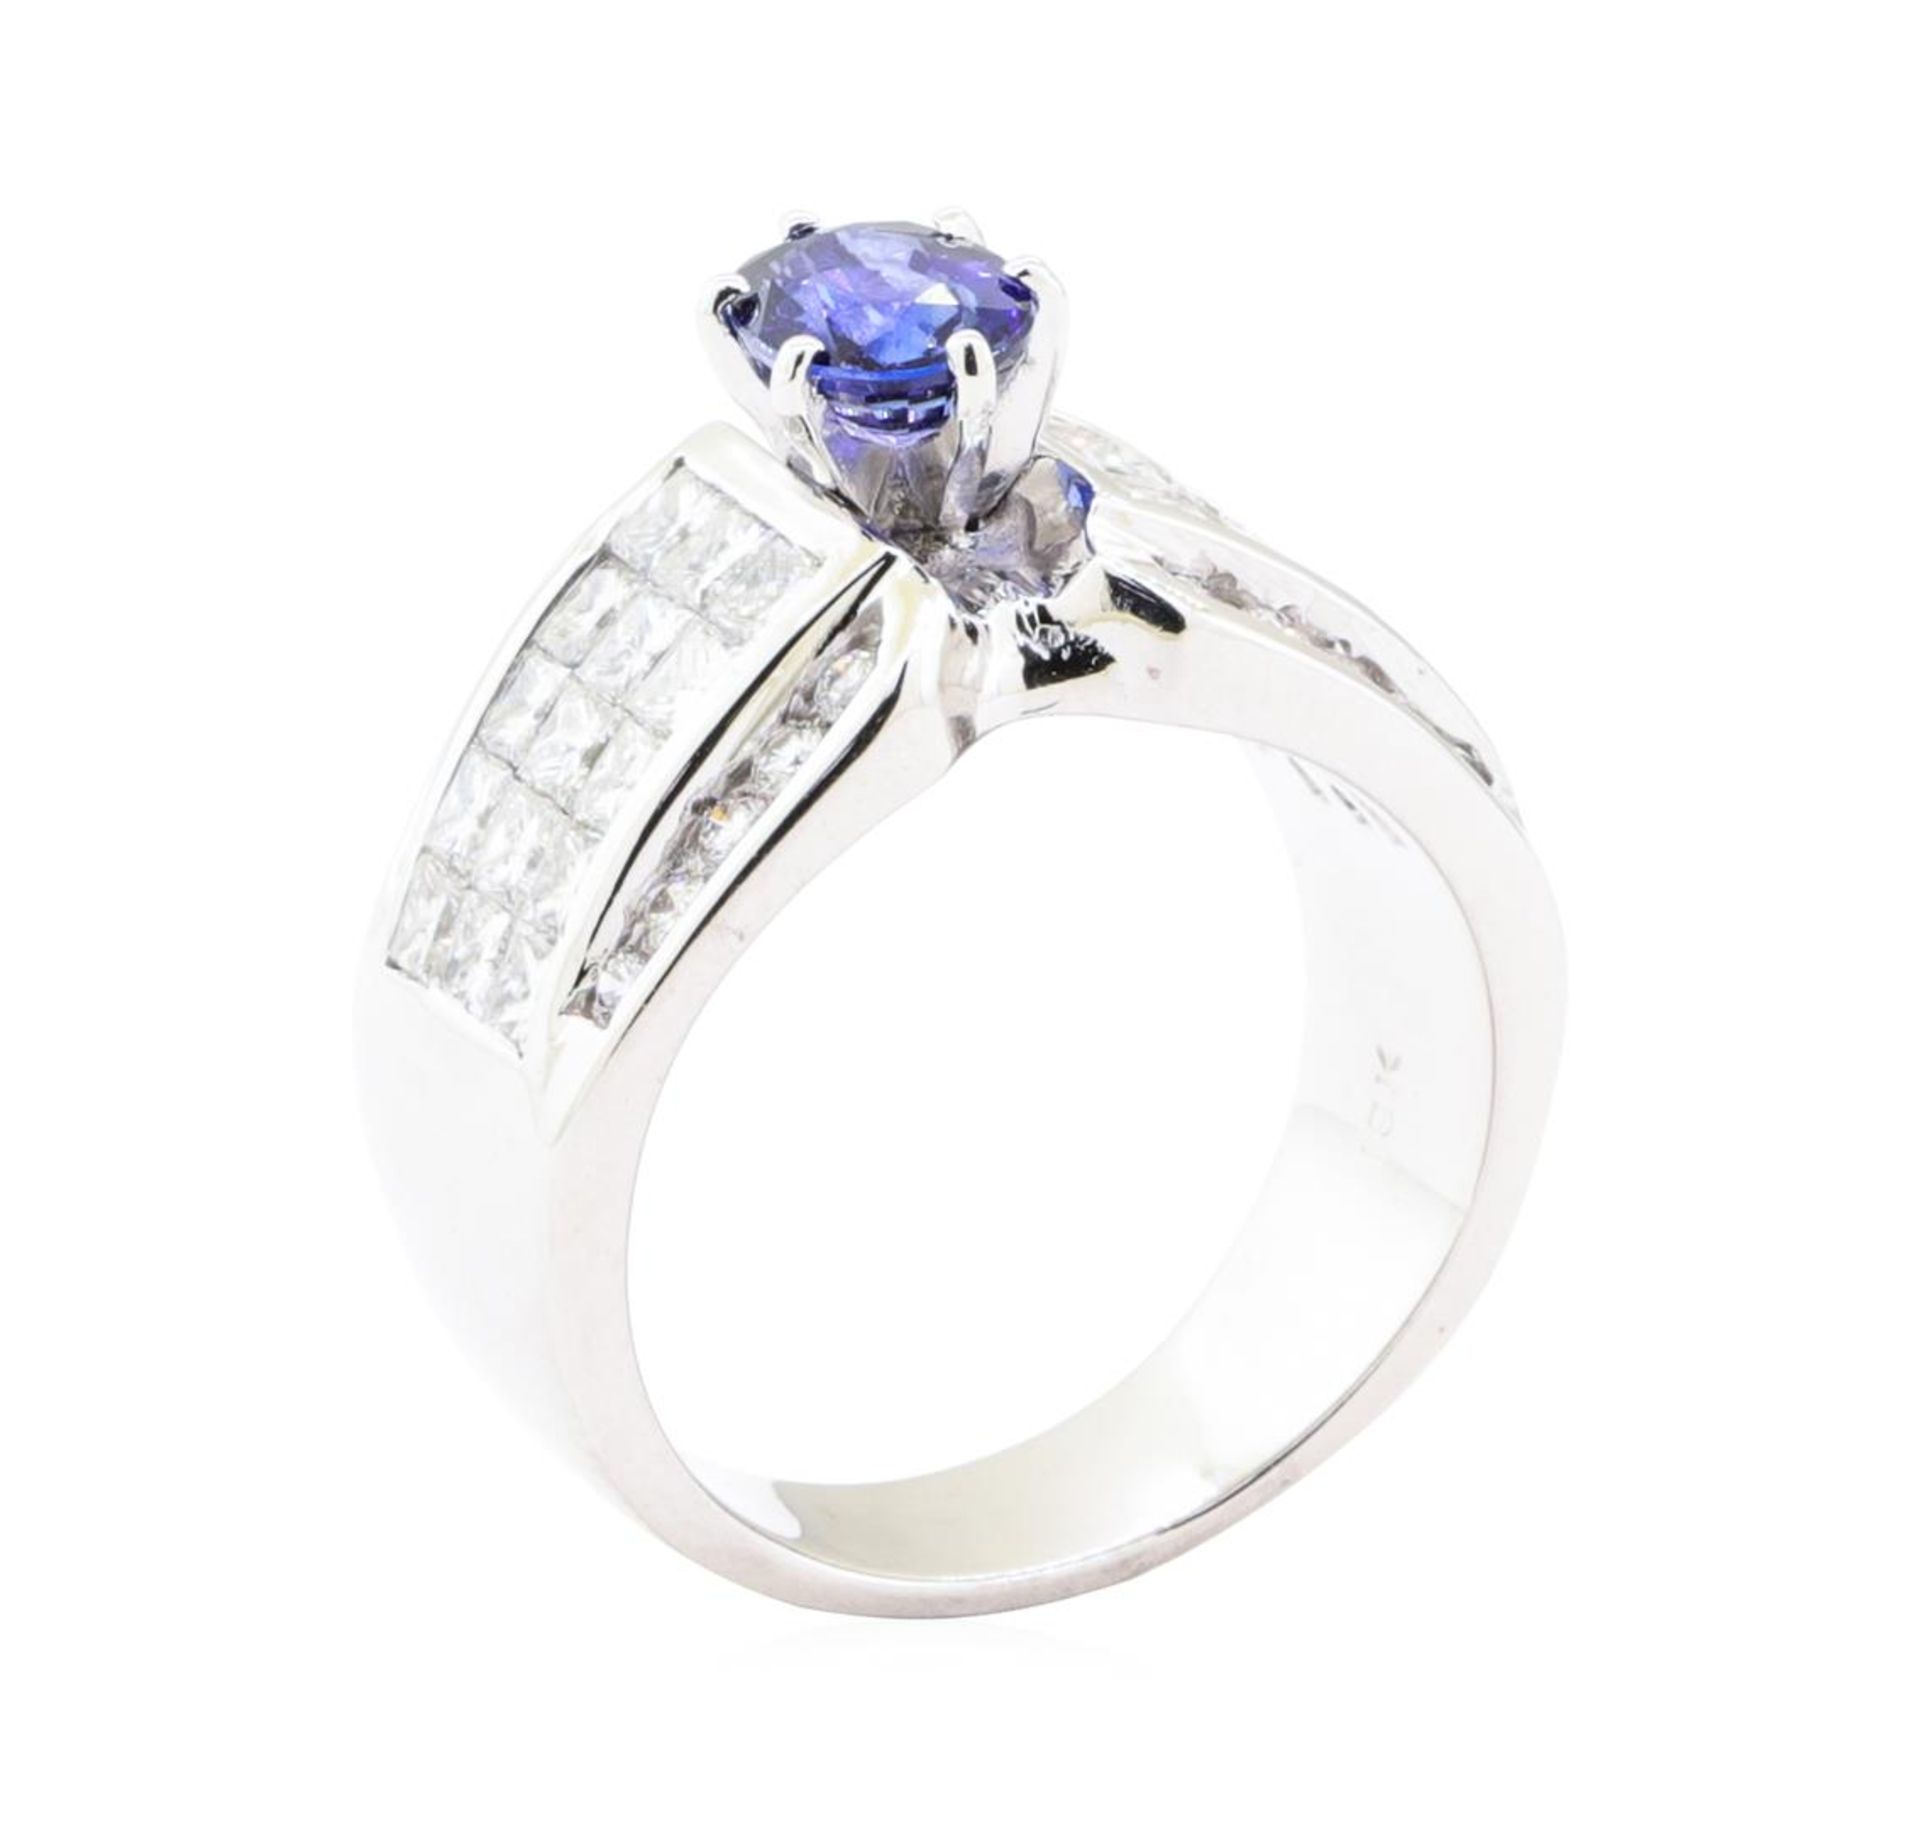 3.43 ctw Sapphire And Diamond Ring - 18KT White Gold - Image 4 of 5